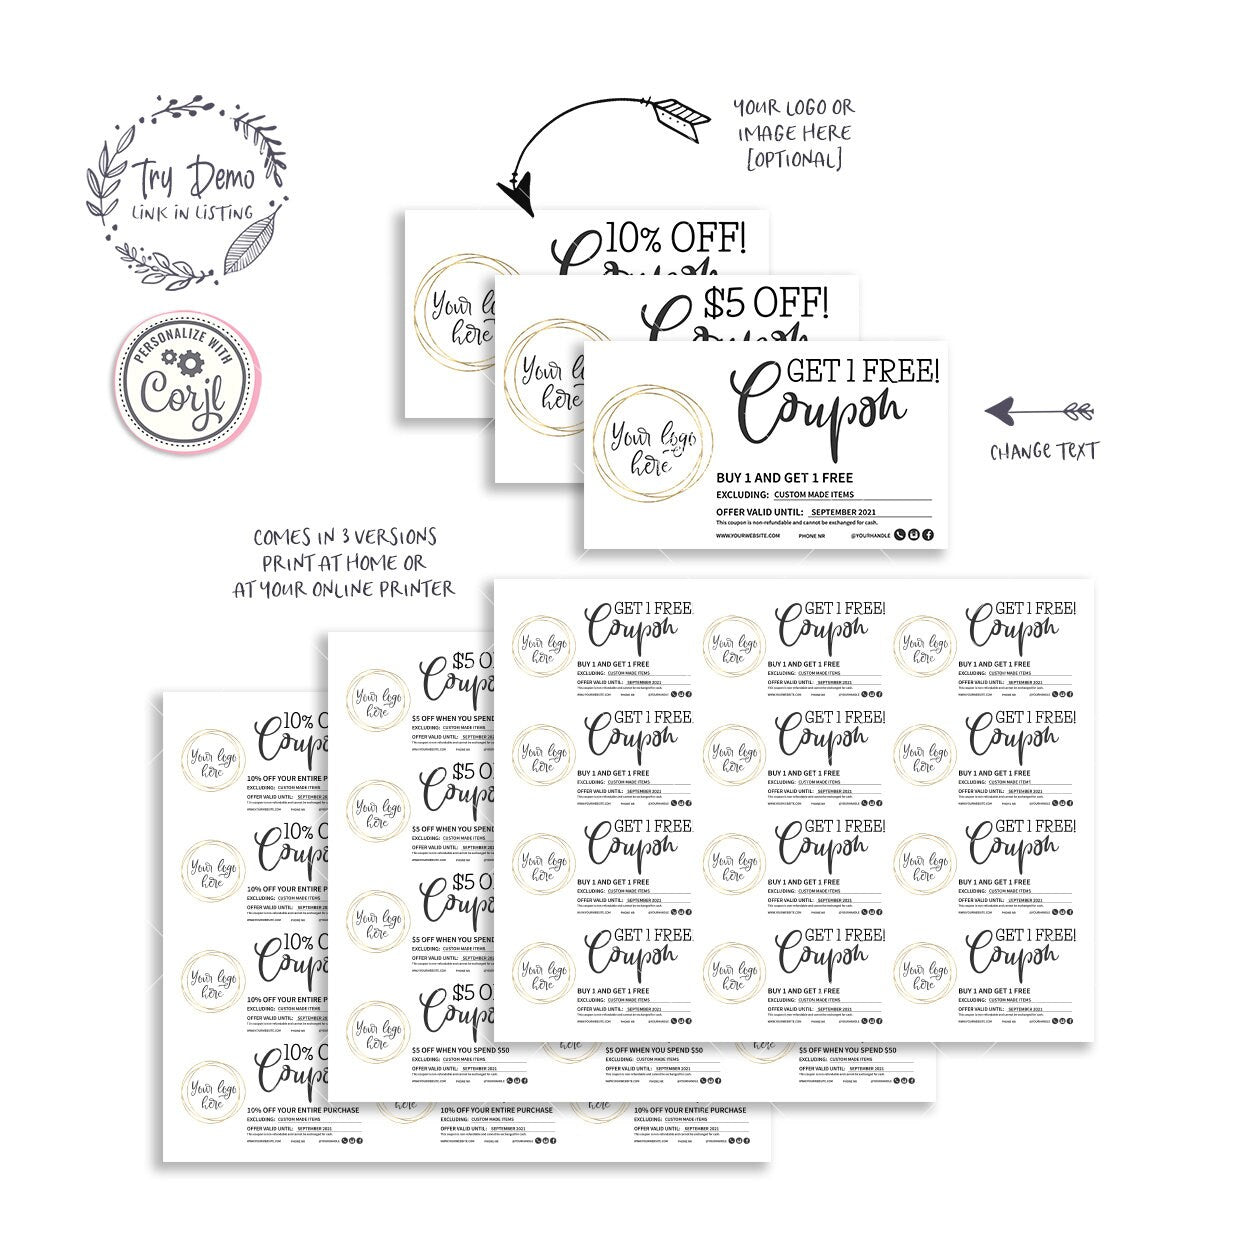 Blank Gift Coupons 3 x 2.5" - Candy Jar Studios